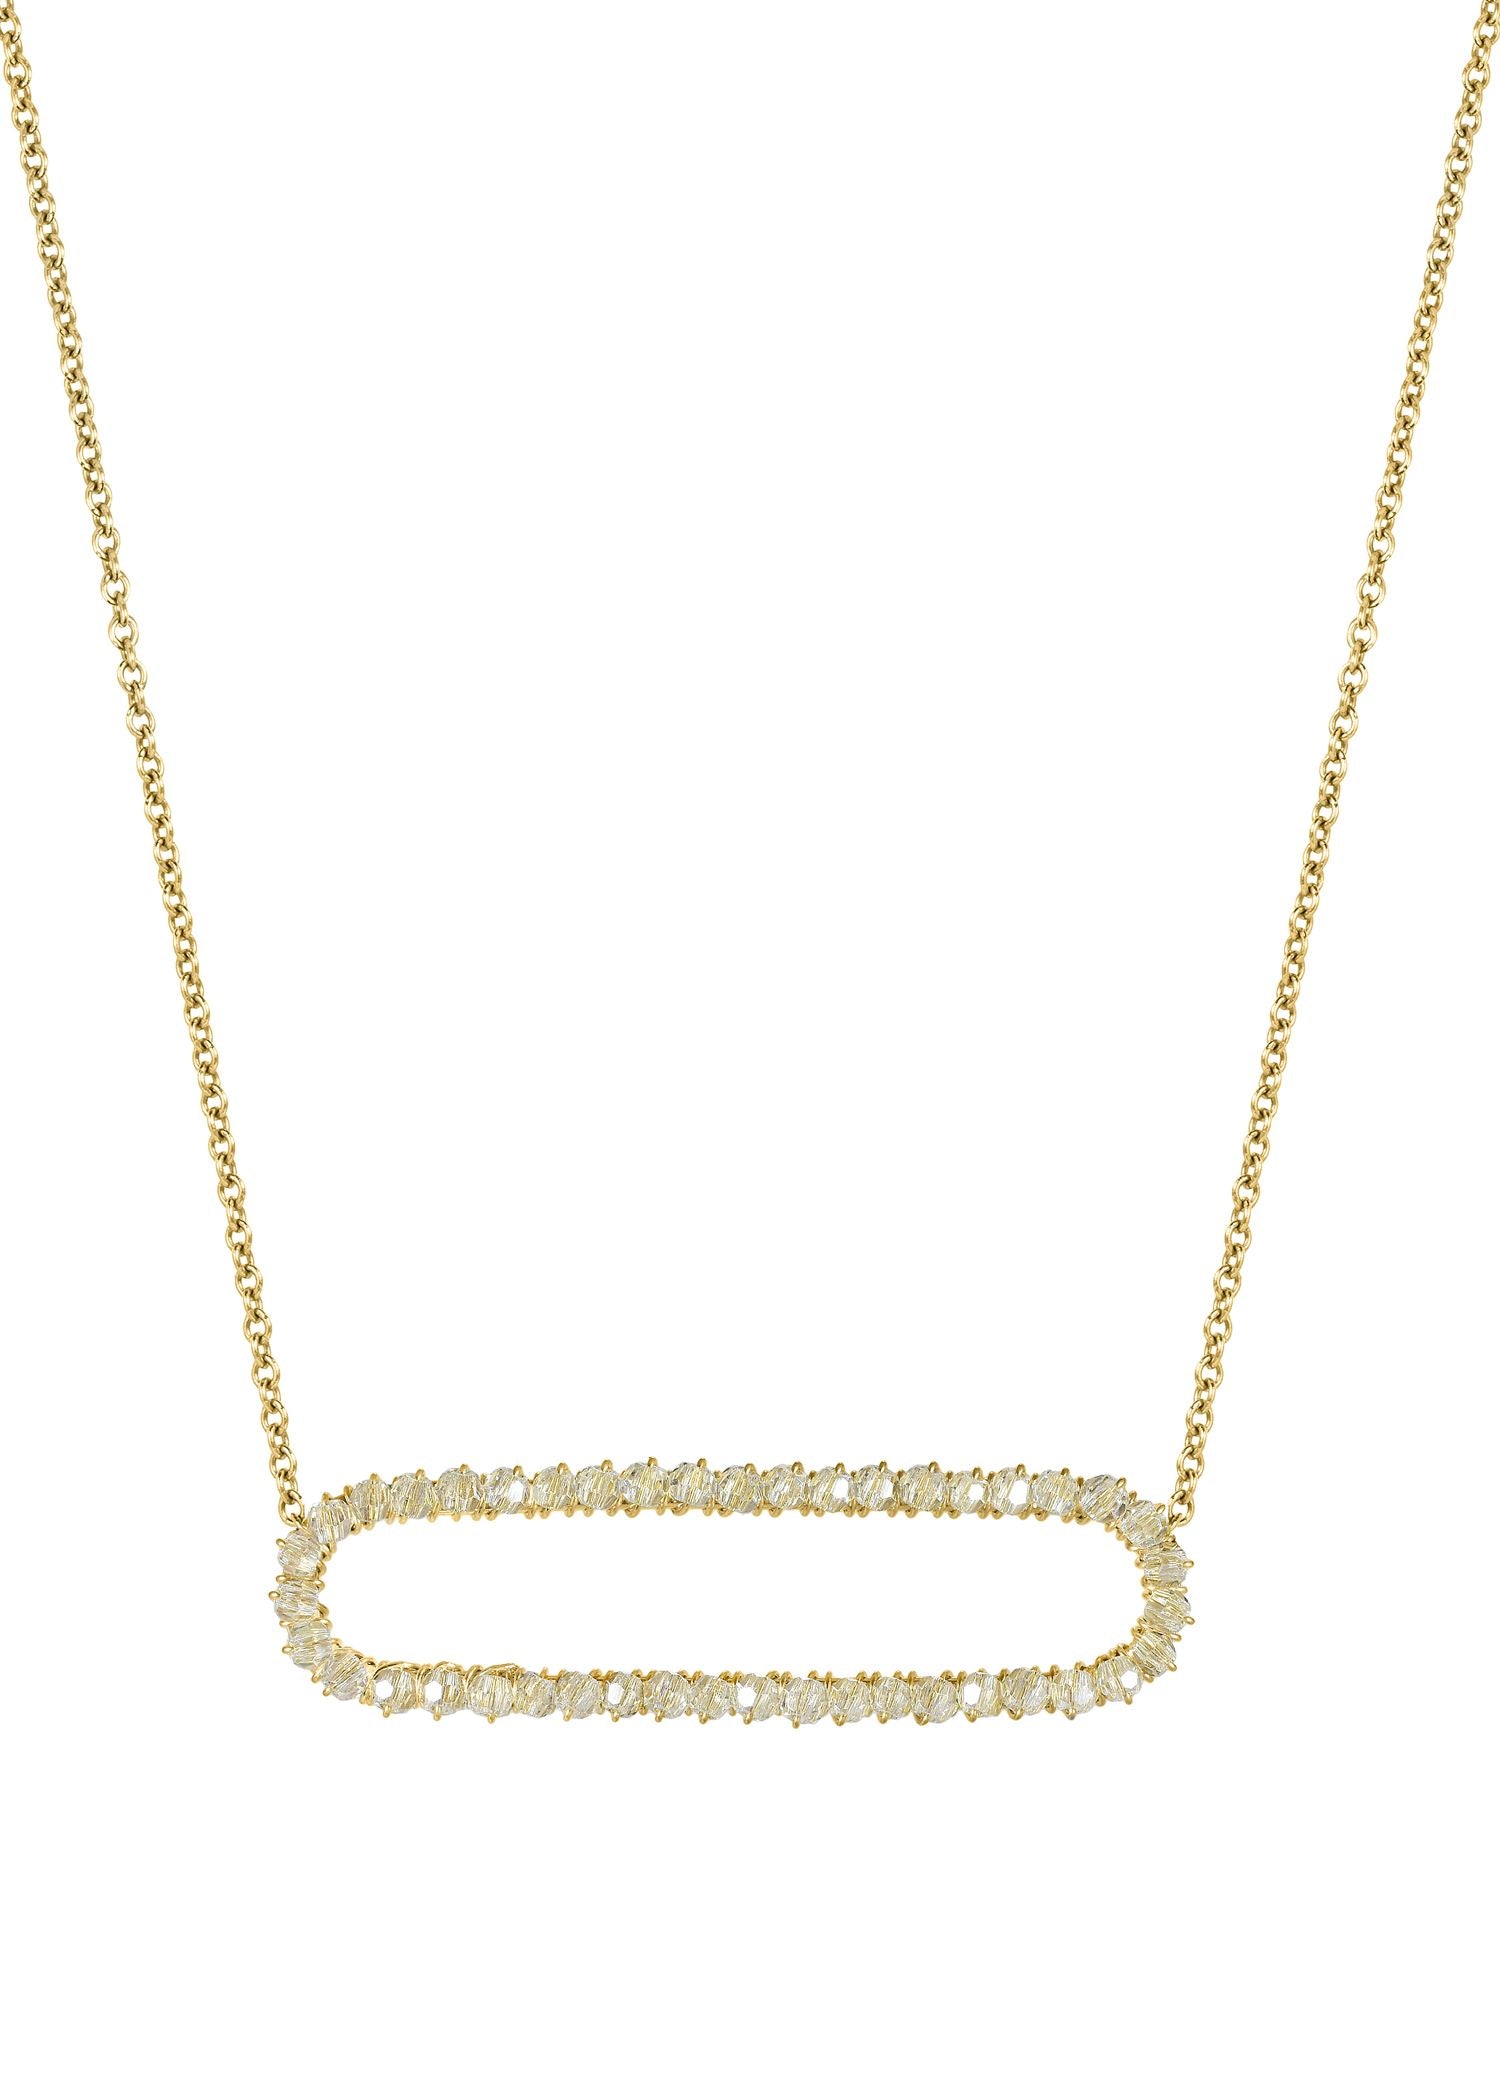 Crystal 14k gold fill Necklace measures 16” in length Pendant measures 7/16” in length and 1-1/2” in width Handmade in our Los Angeles studio